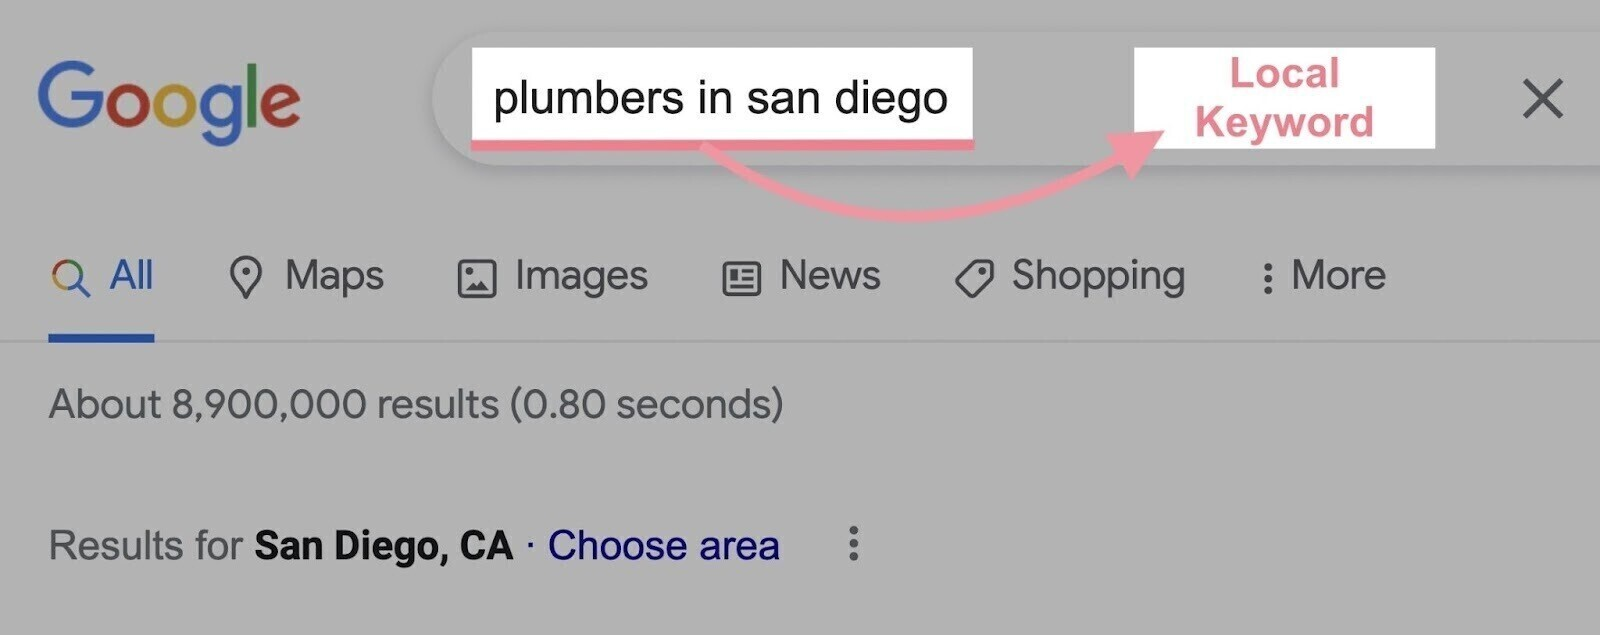 Google search for plumbers in san diego